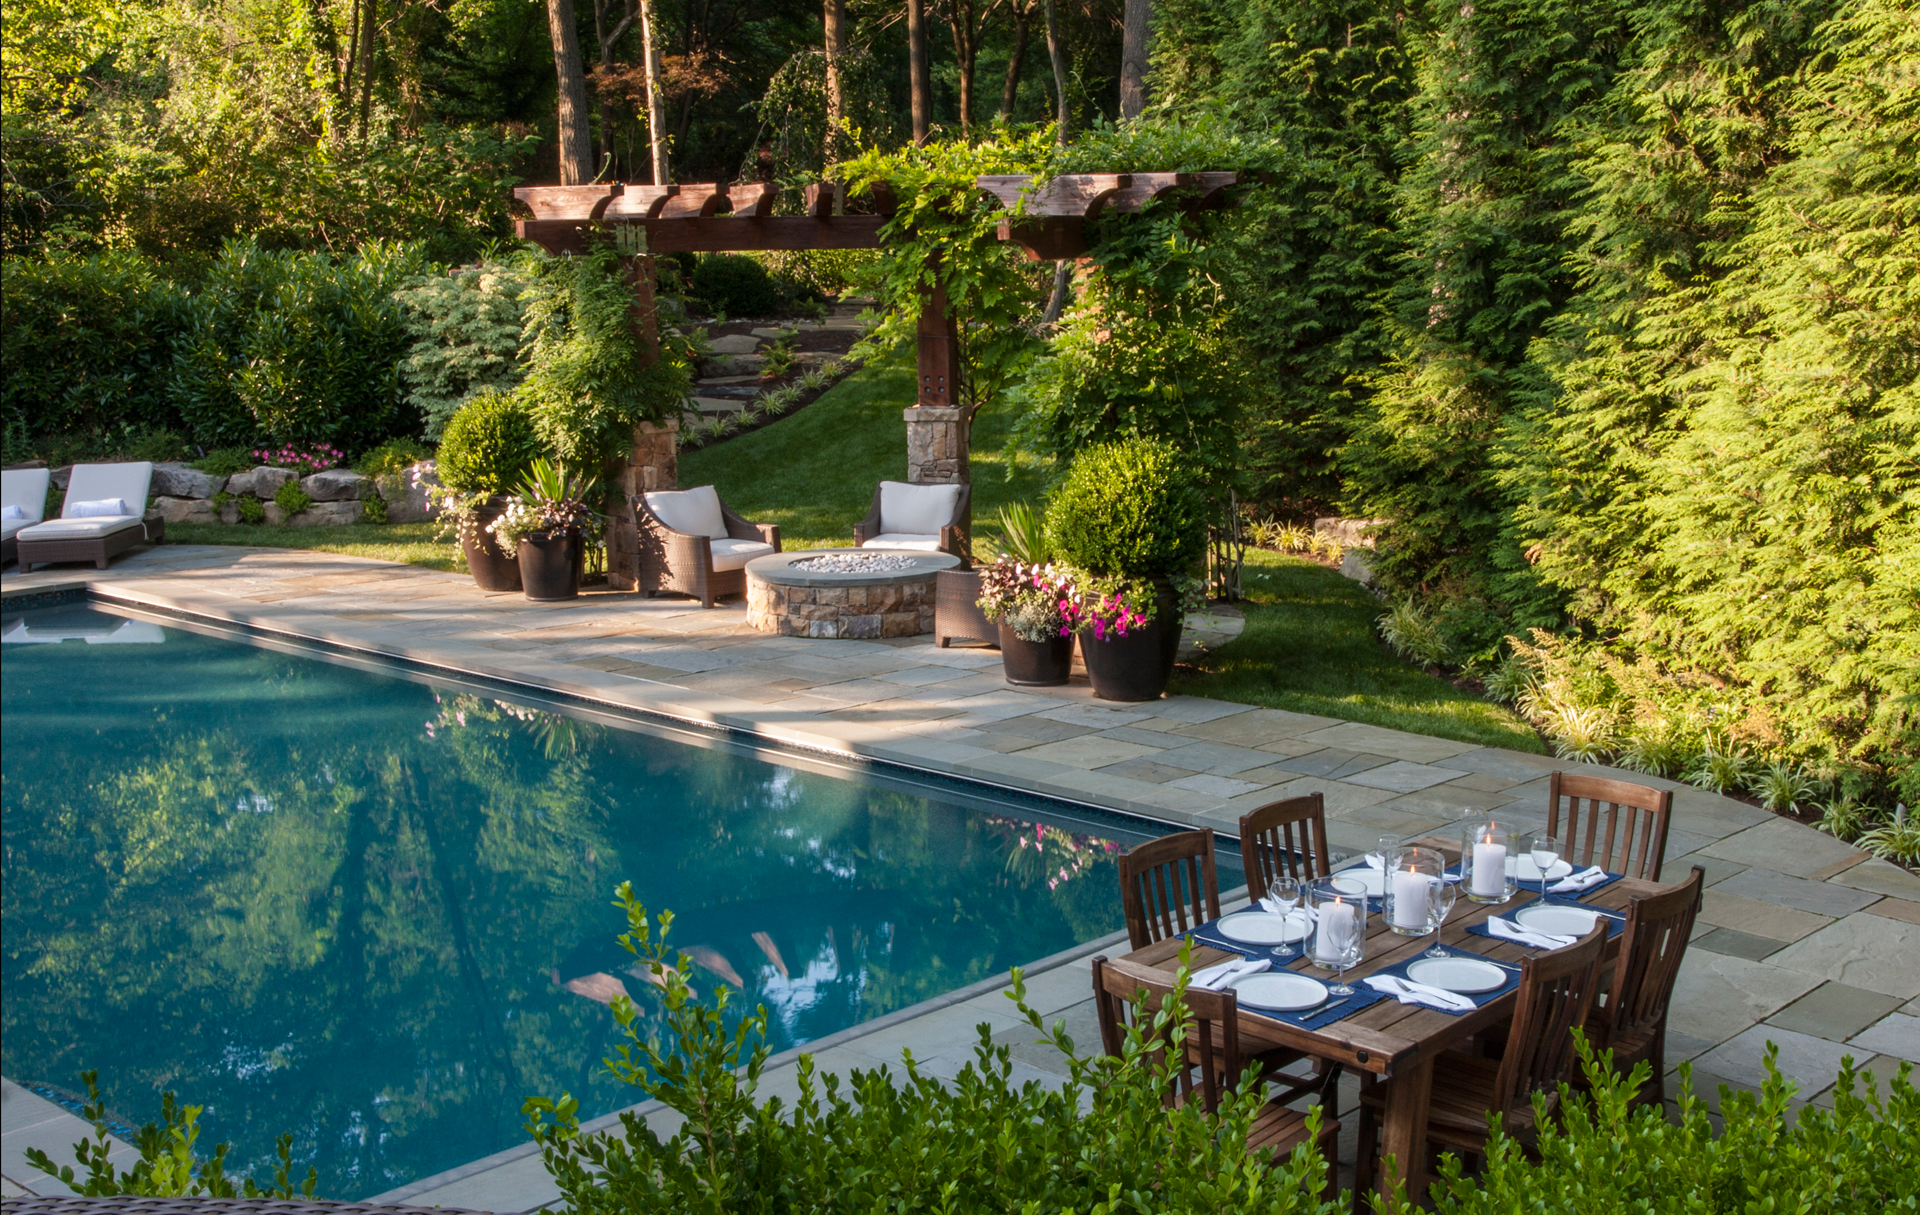 Pool in Backyard with Outdoor Furniture, Fire Place, Flowers, and Bushes